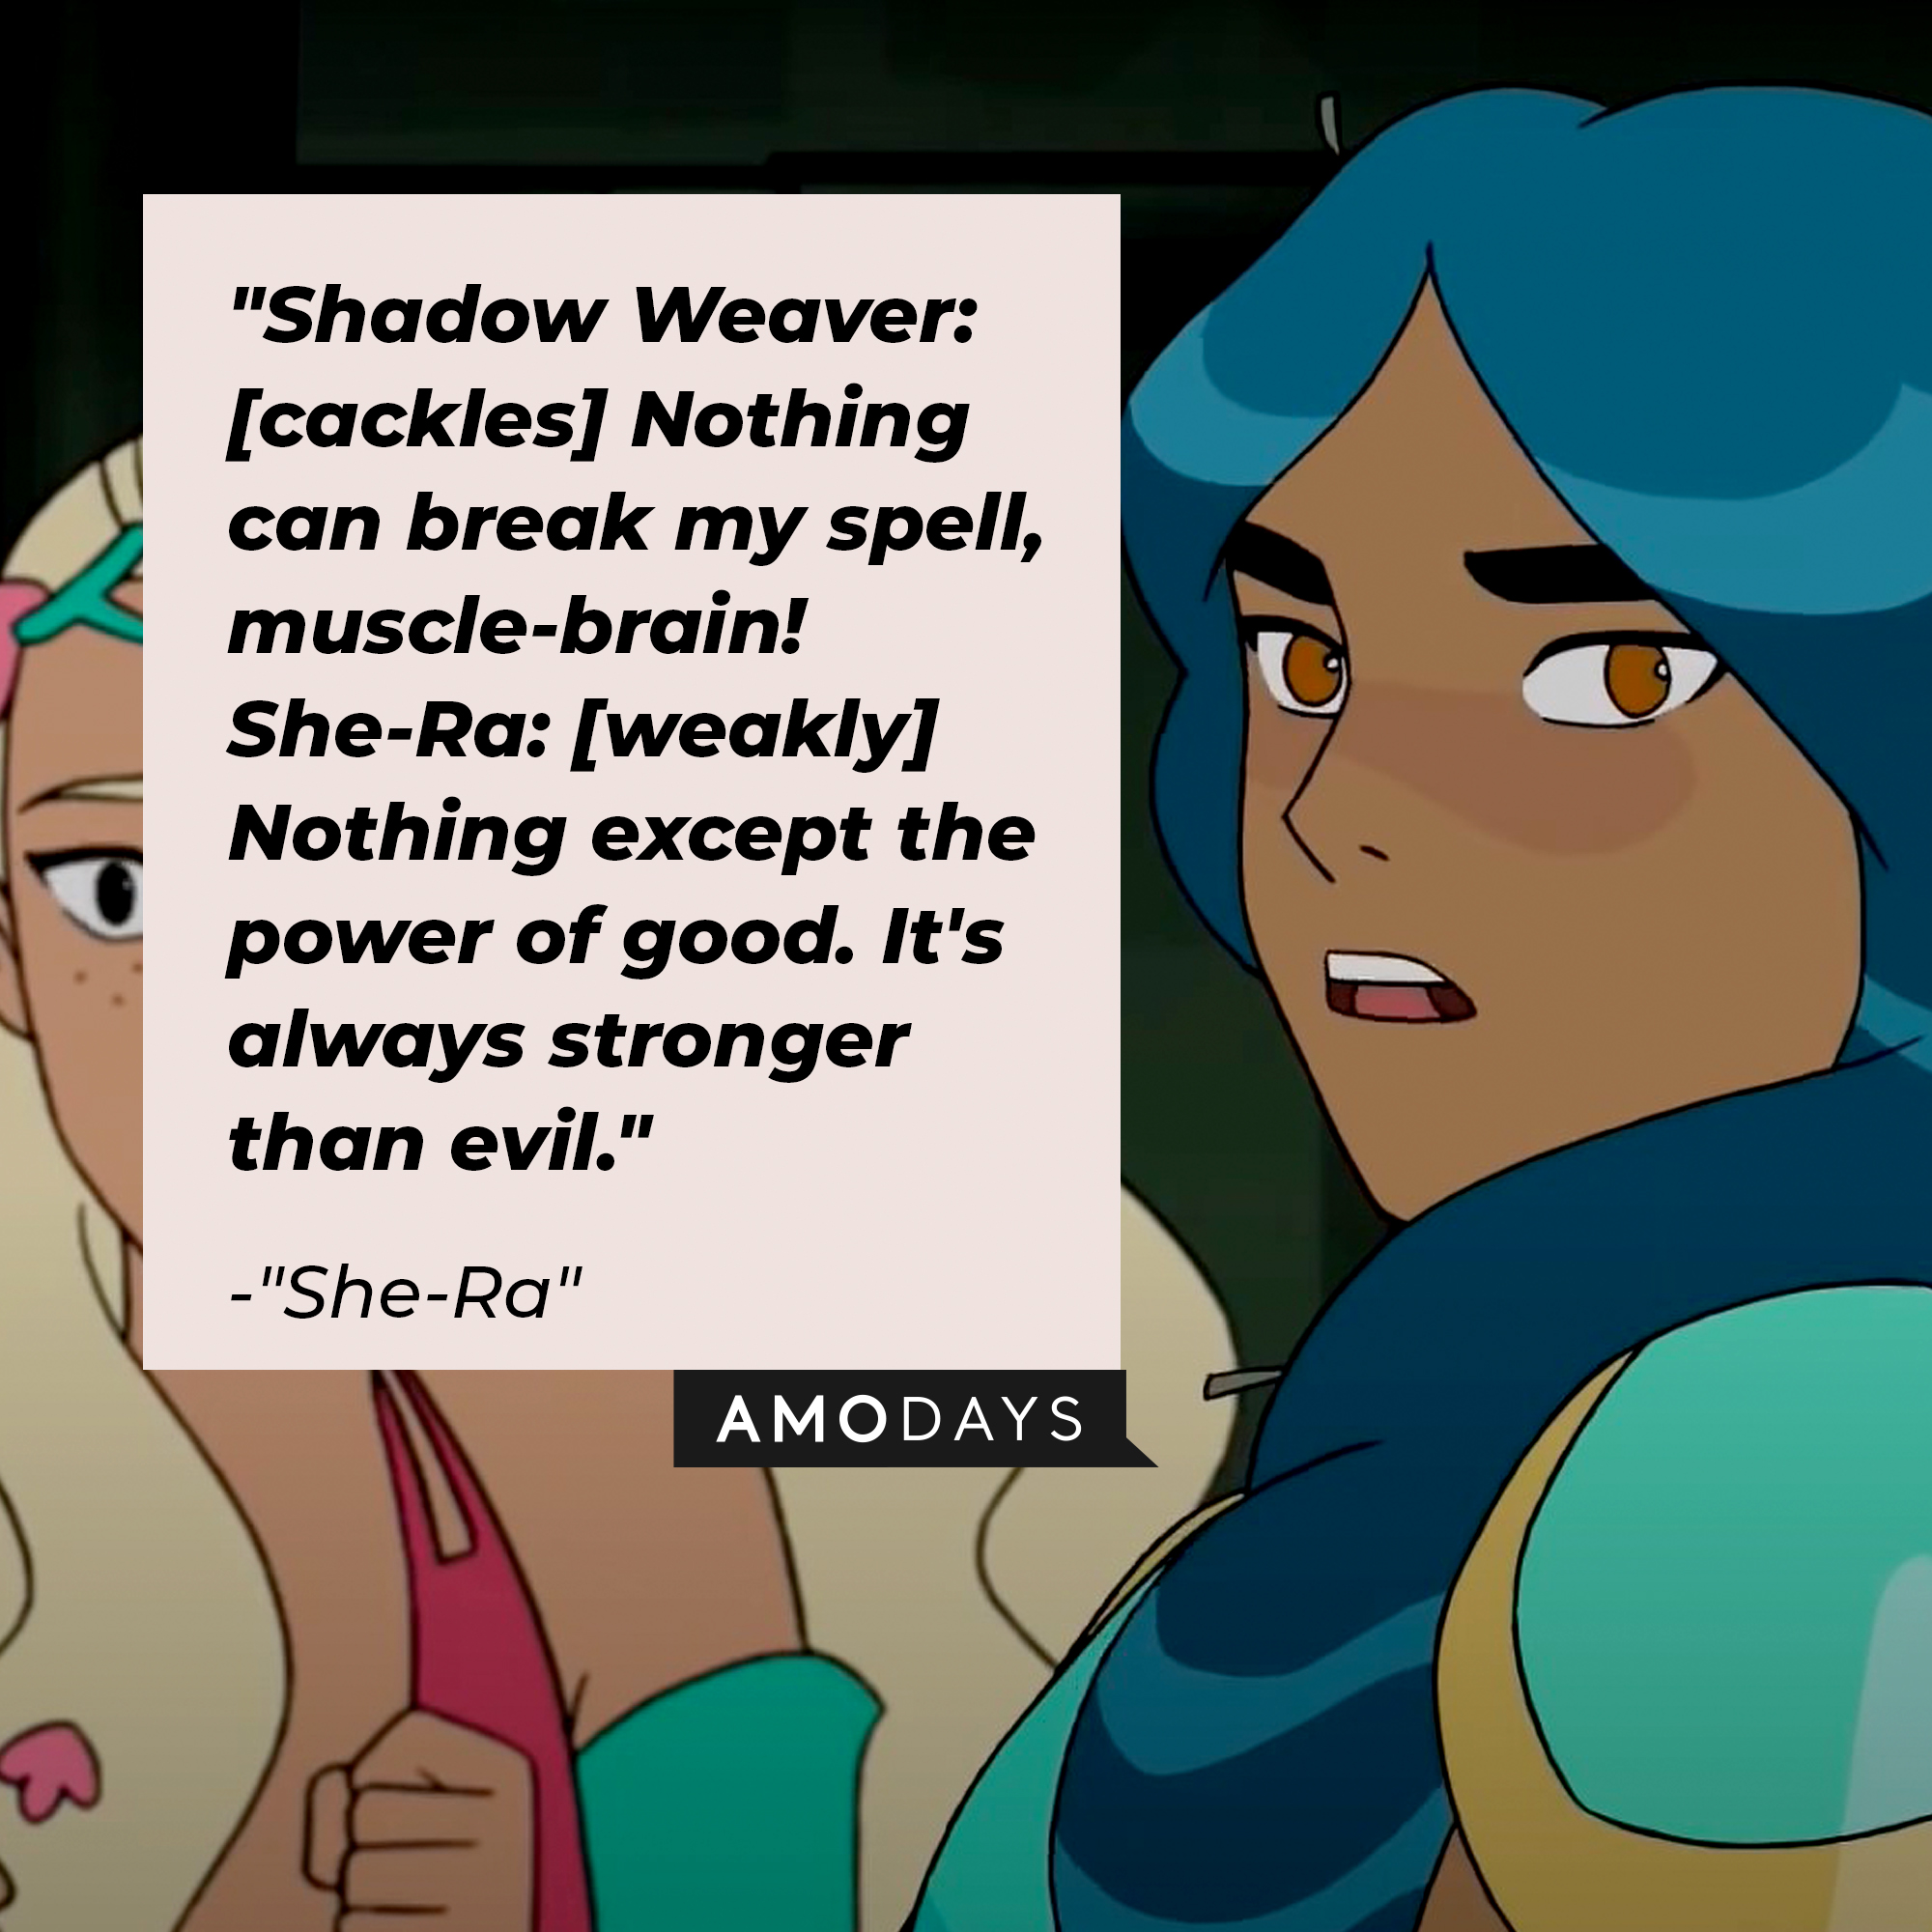 "She-Ra's" quote: "Shadow Weaver: [cackles] Nothing can break my spell, muscle-brain! / She-Ra: [weakly] Nothing except the power of good. It's always stronger than evil." | Source: Facebook.com/DreamWorksSheRa